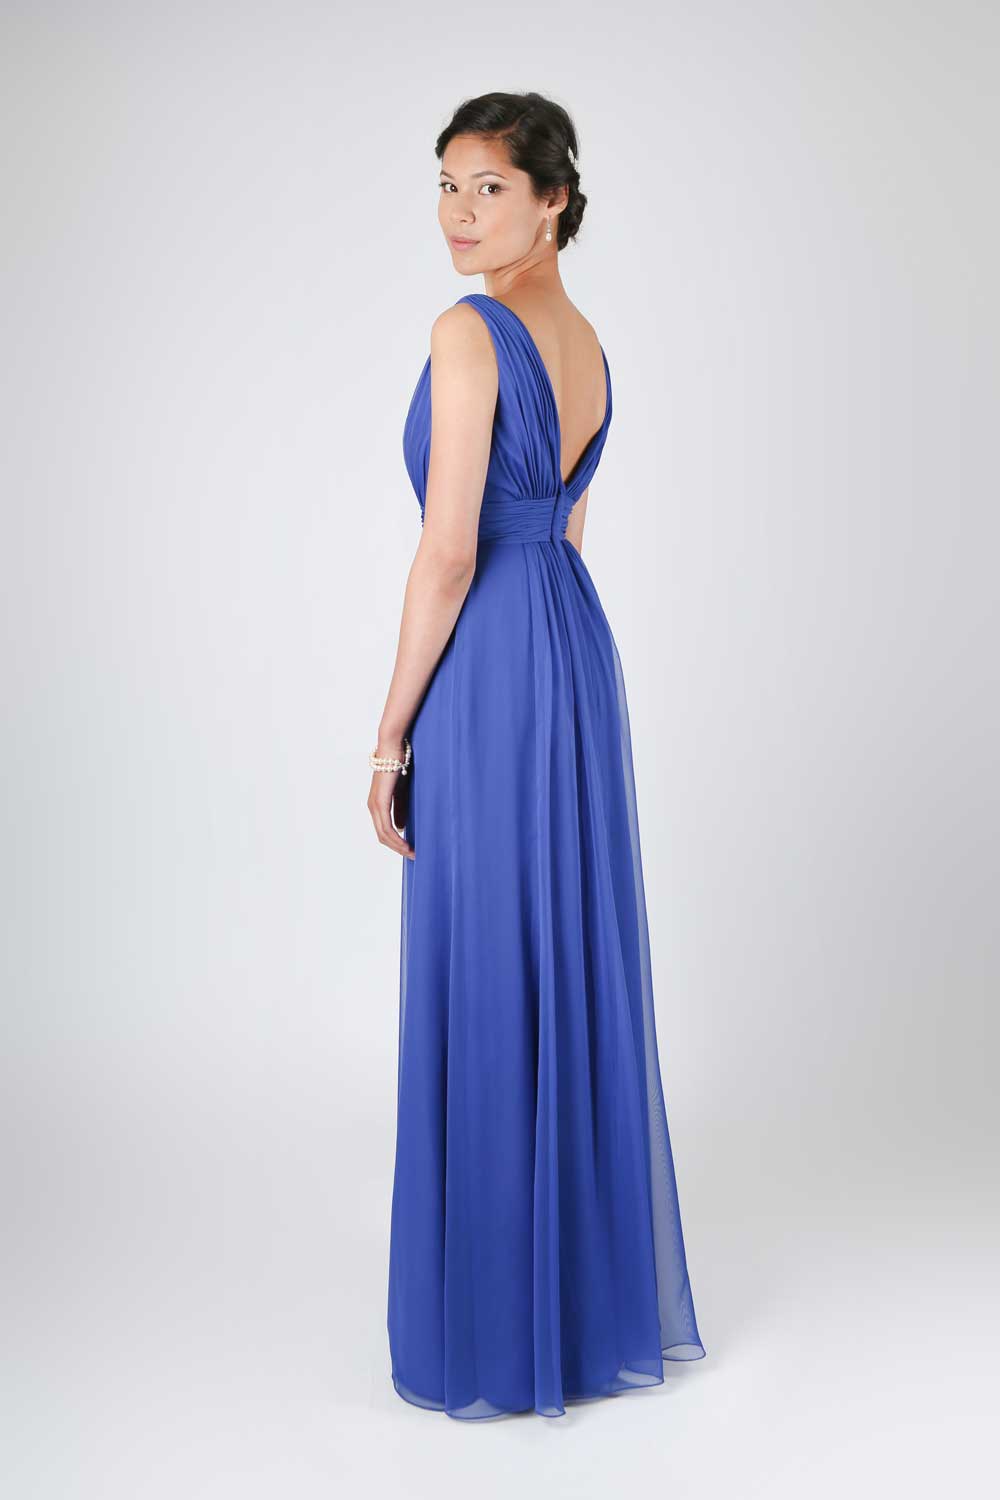 Bridesmaid dress with tapered shoulders